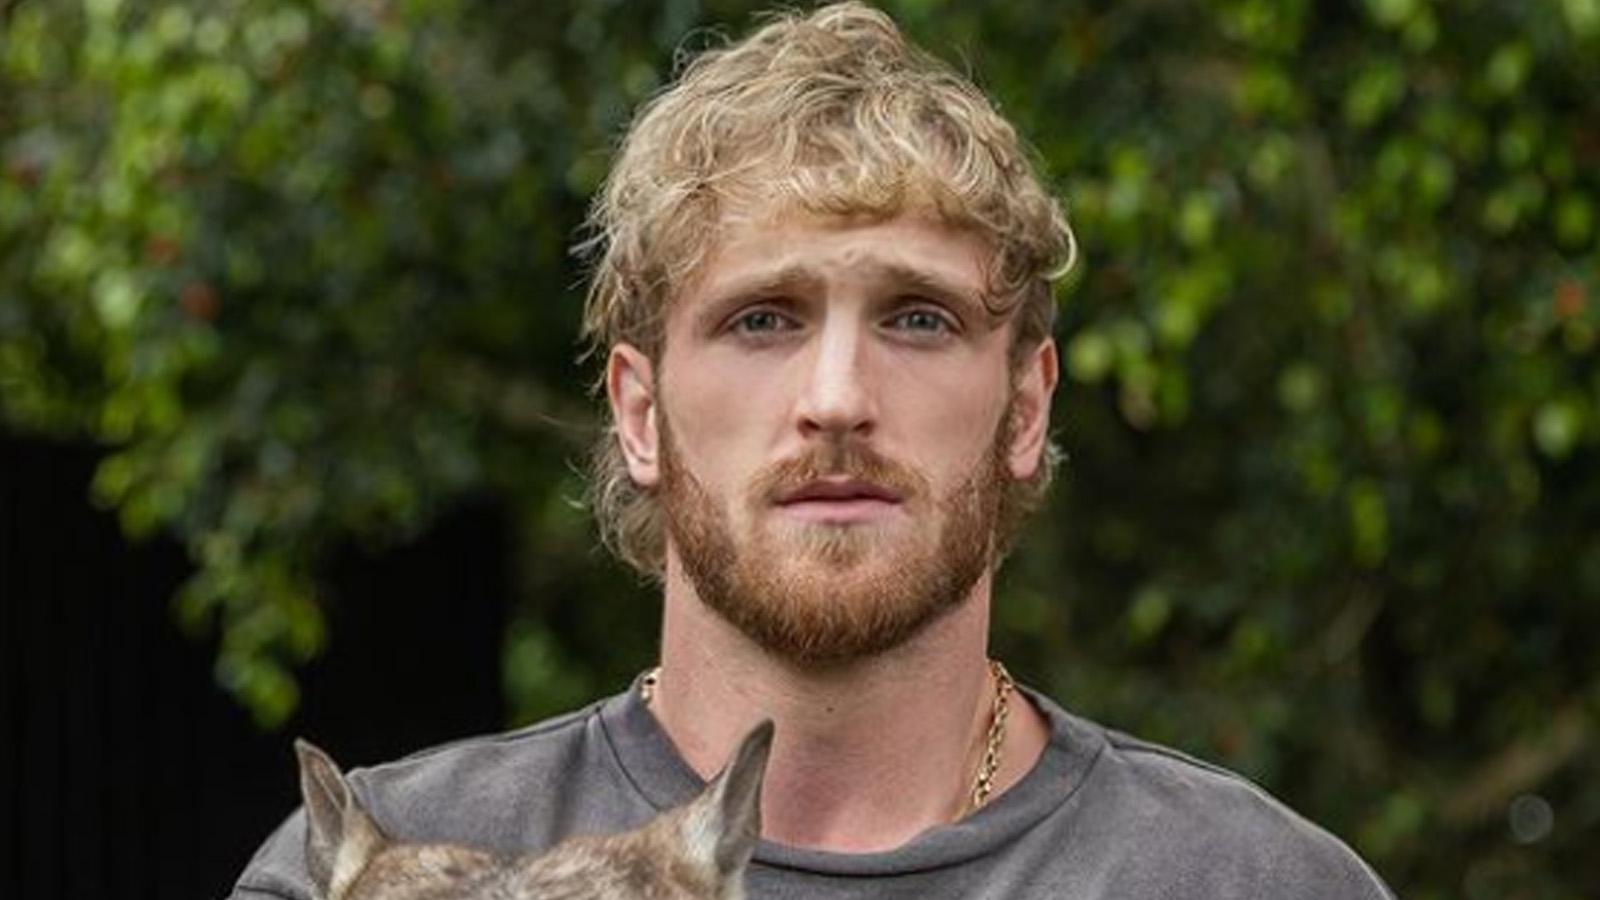 Logan Paul under fire as CryptoZoo victims reportedly offered 10% compensation